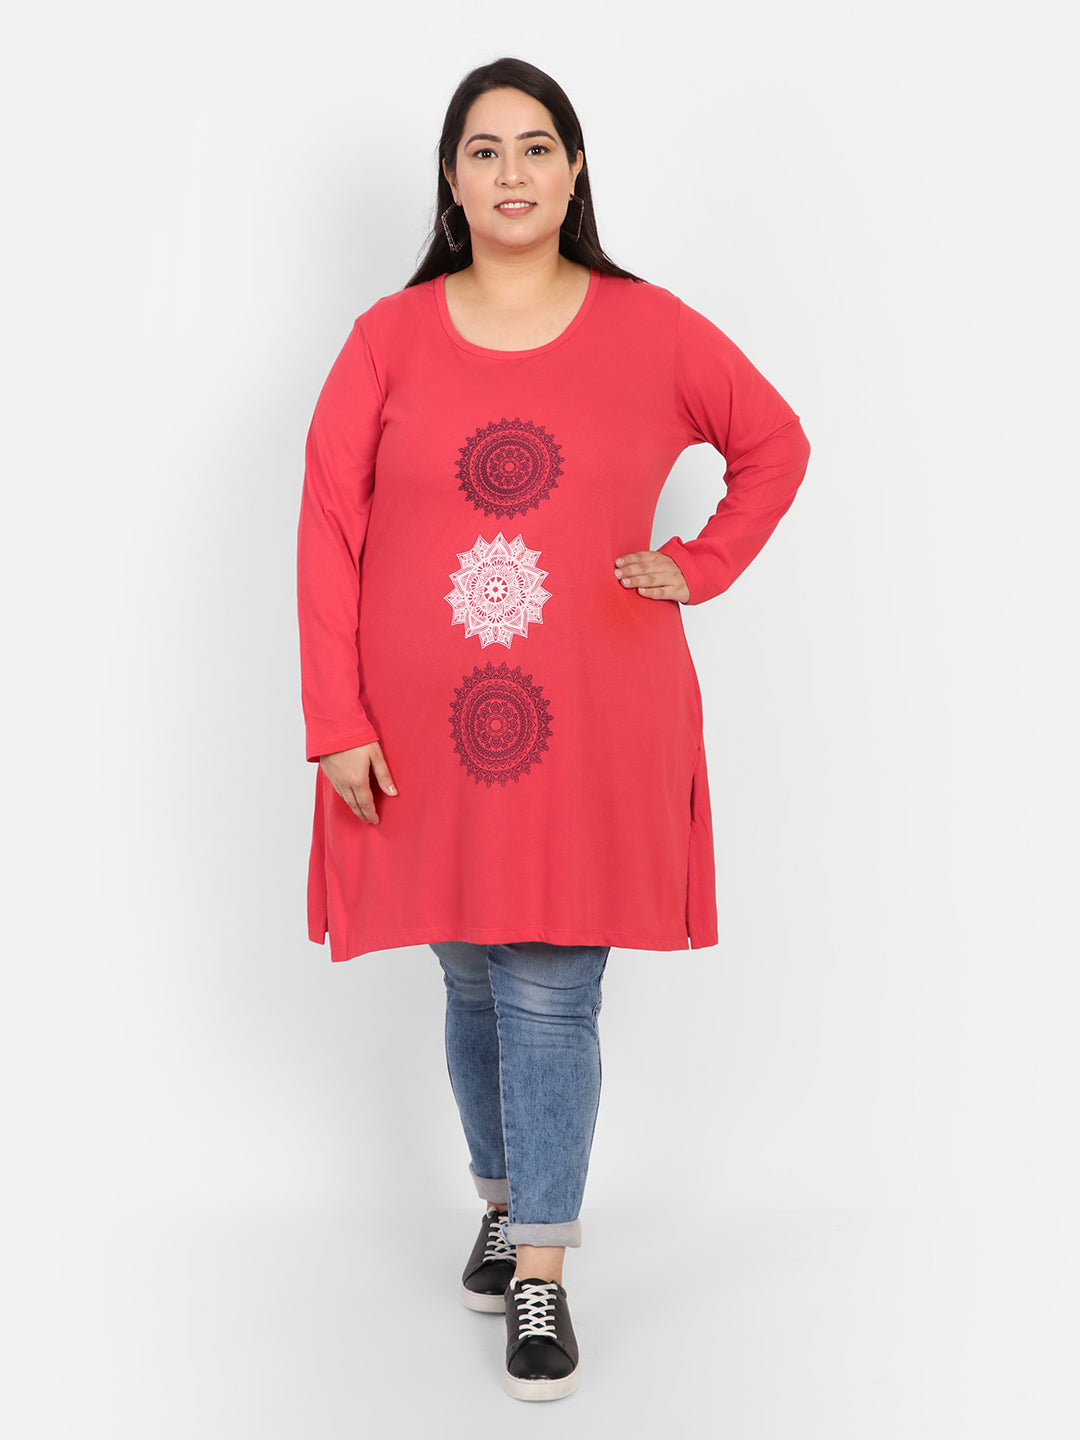 Stylish Red Cotton Full Sleeves Long Top For Women in Plus Size at best prices